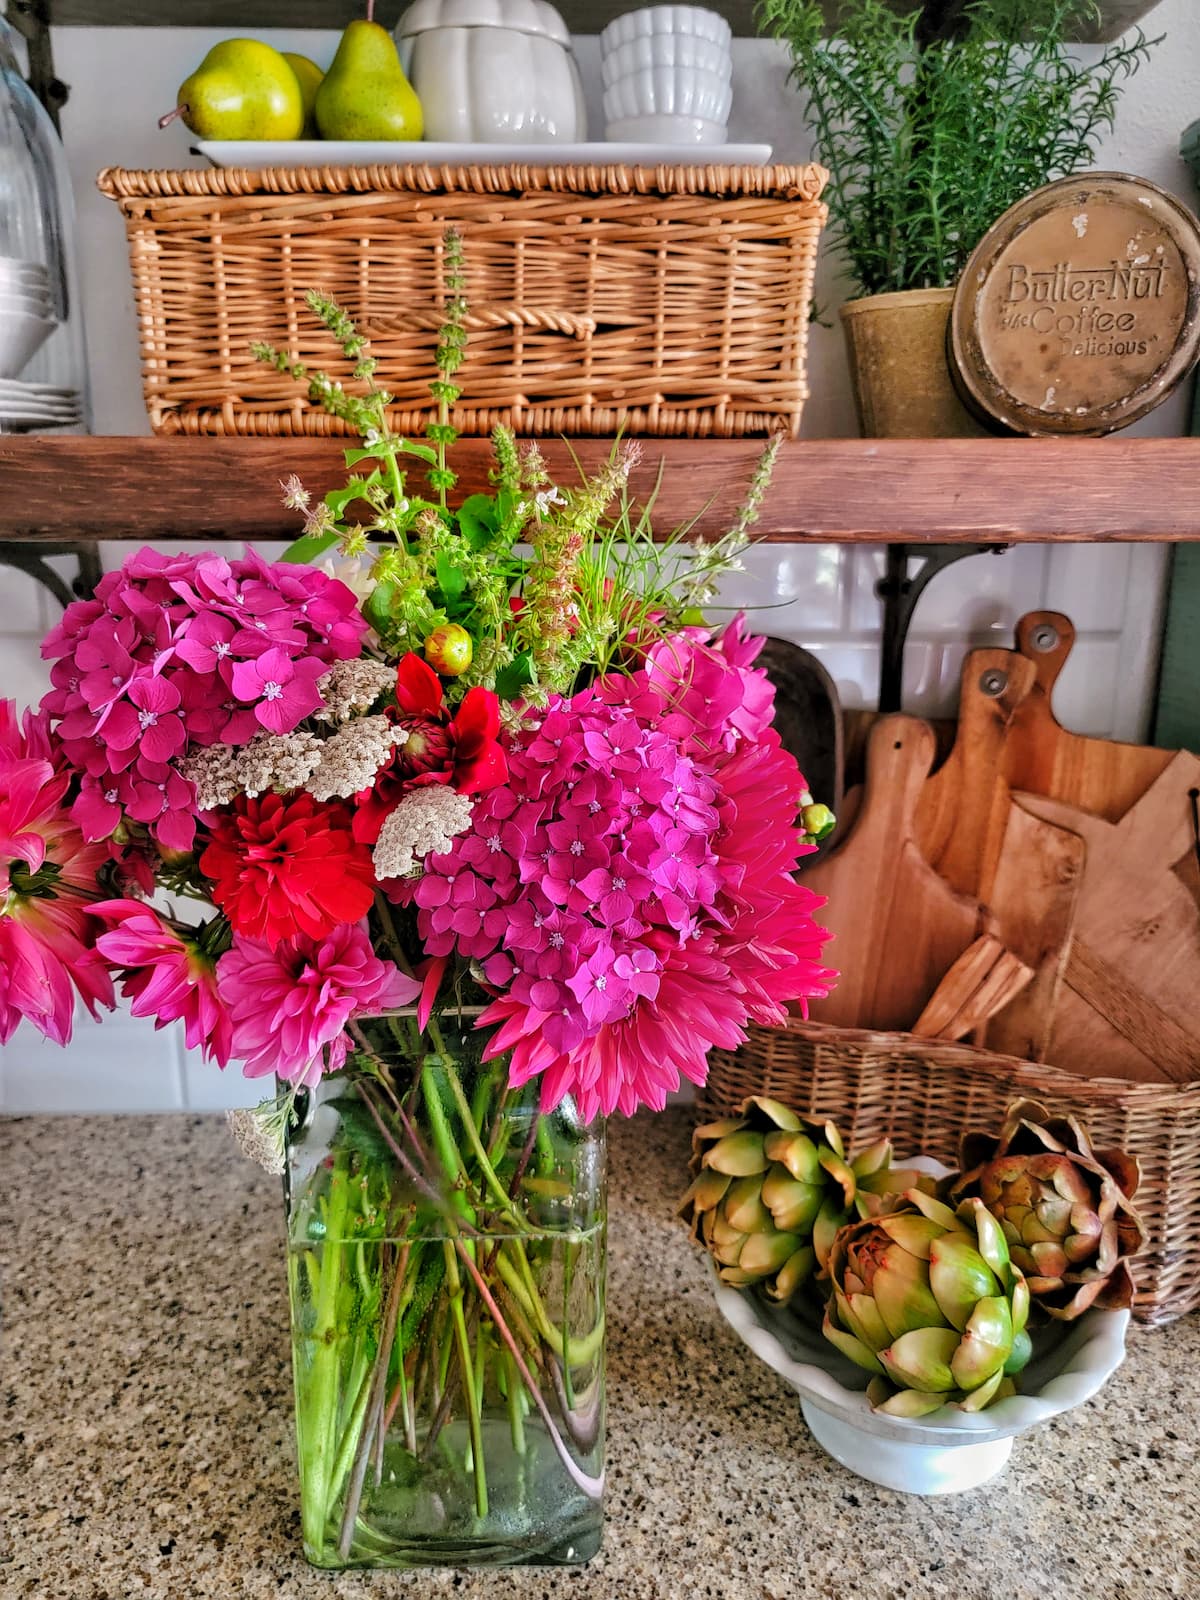 How to Get the Longest Vase Life from Fresh Cut Flowers